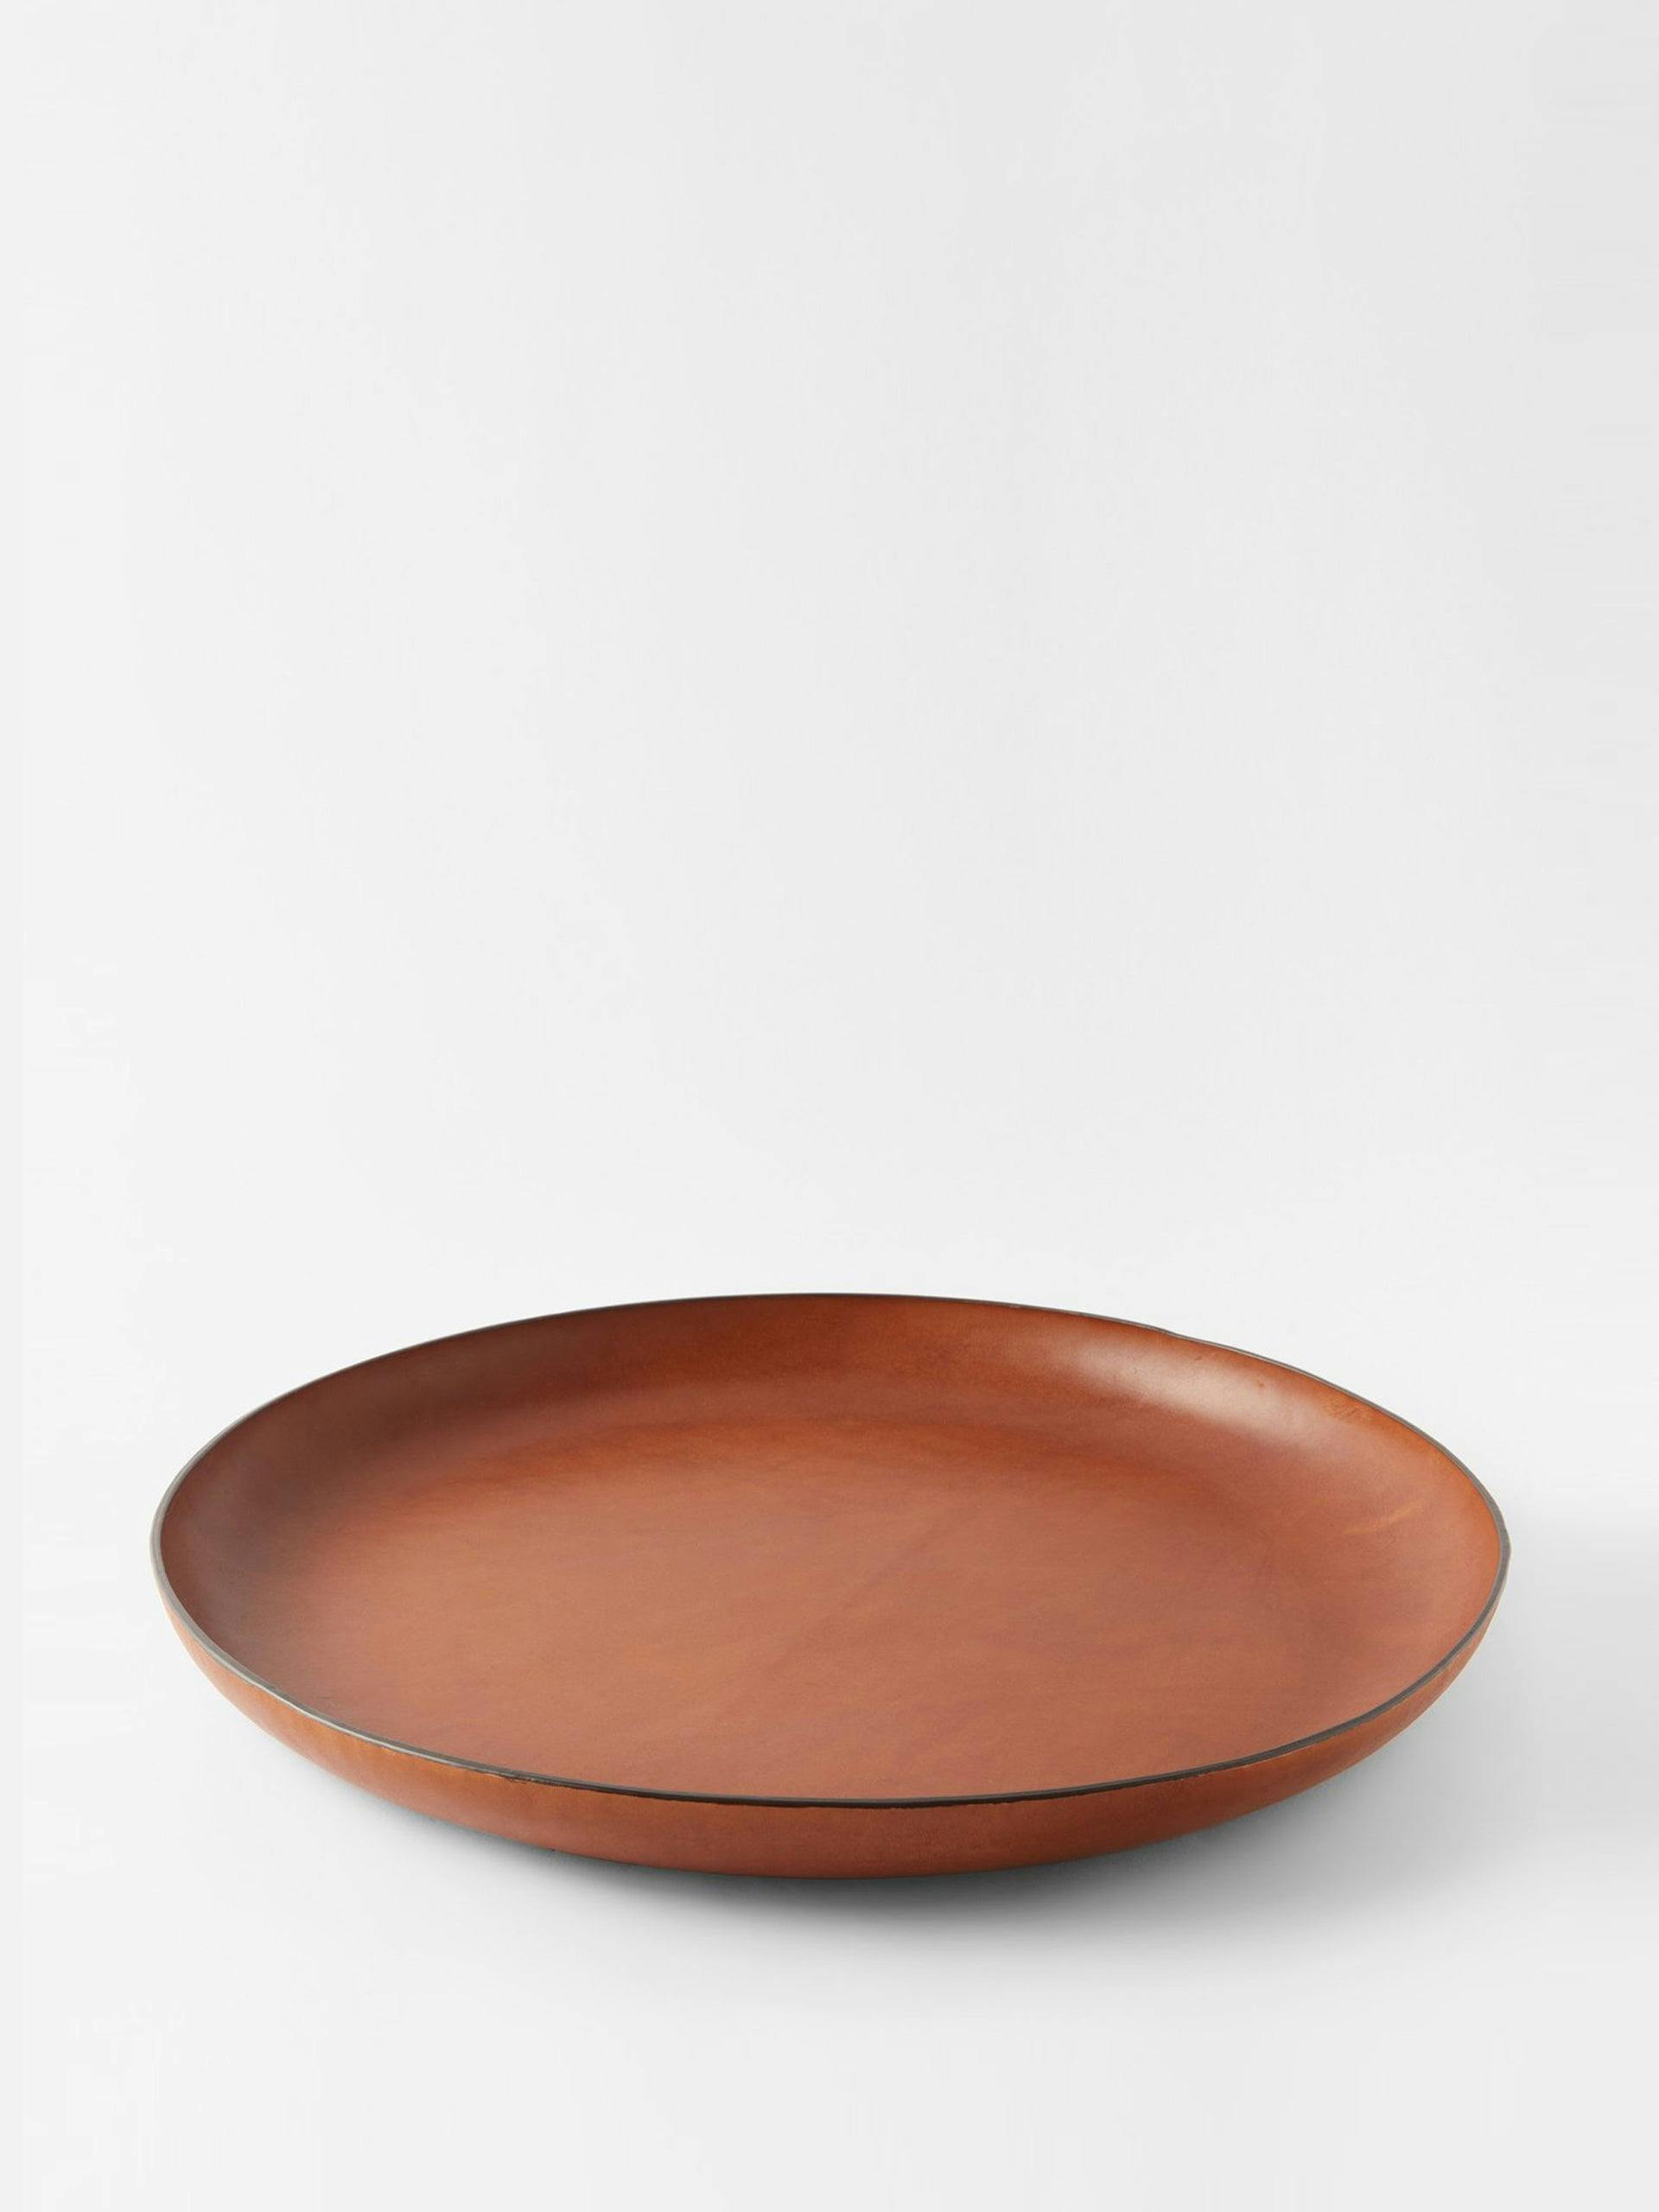 Moulded-leather tray